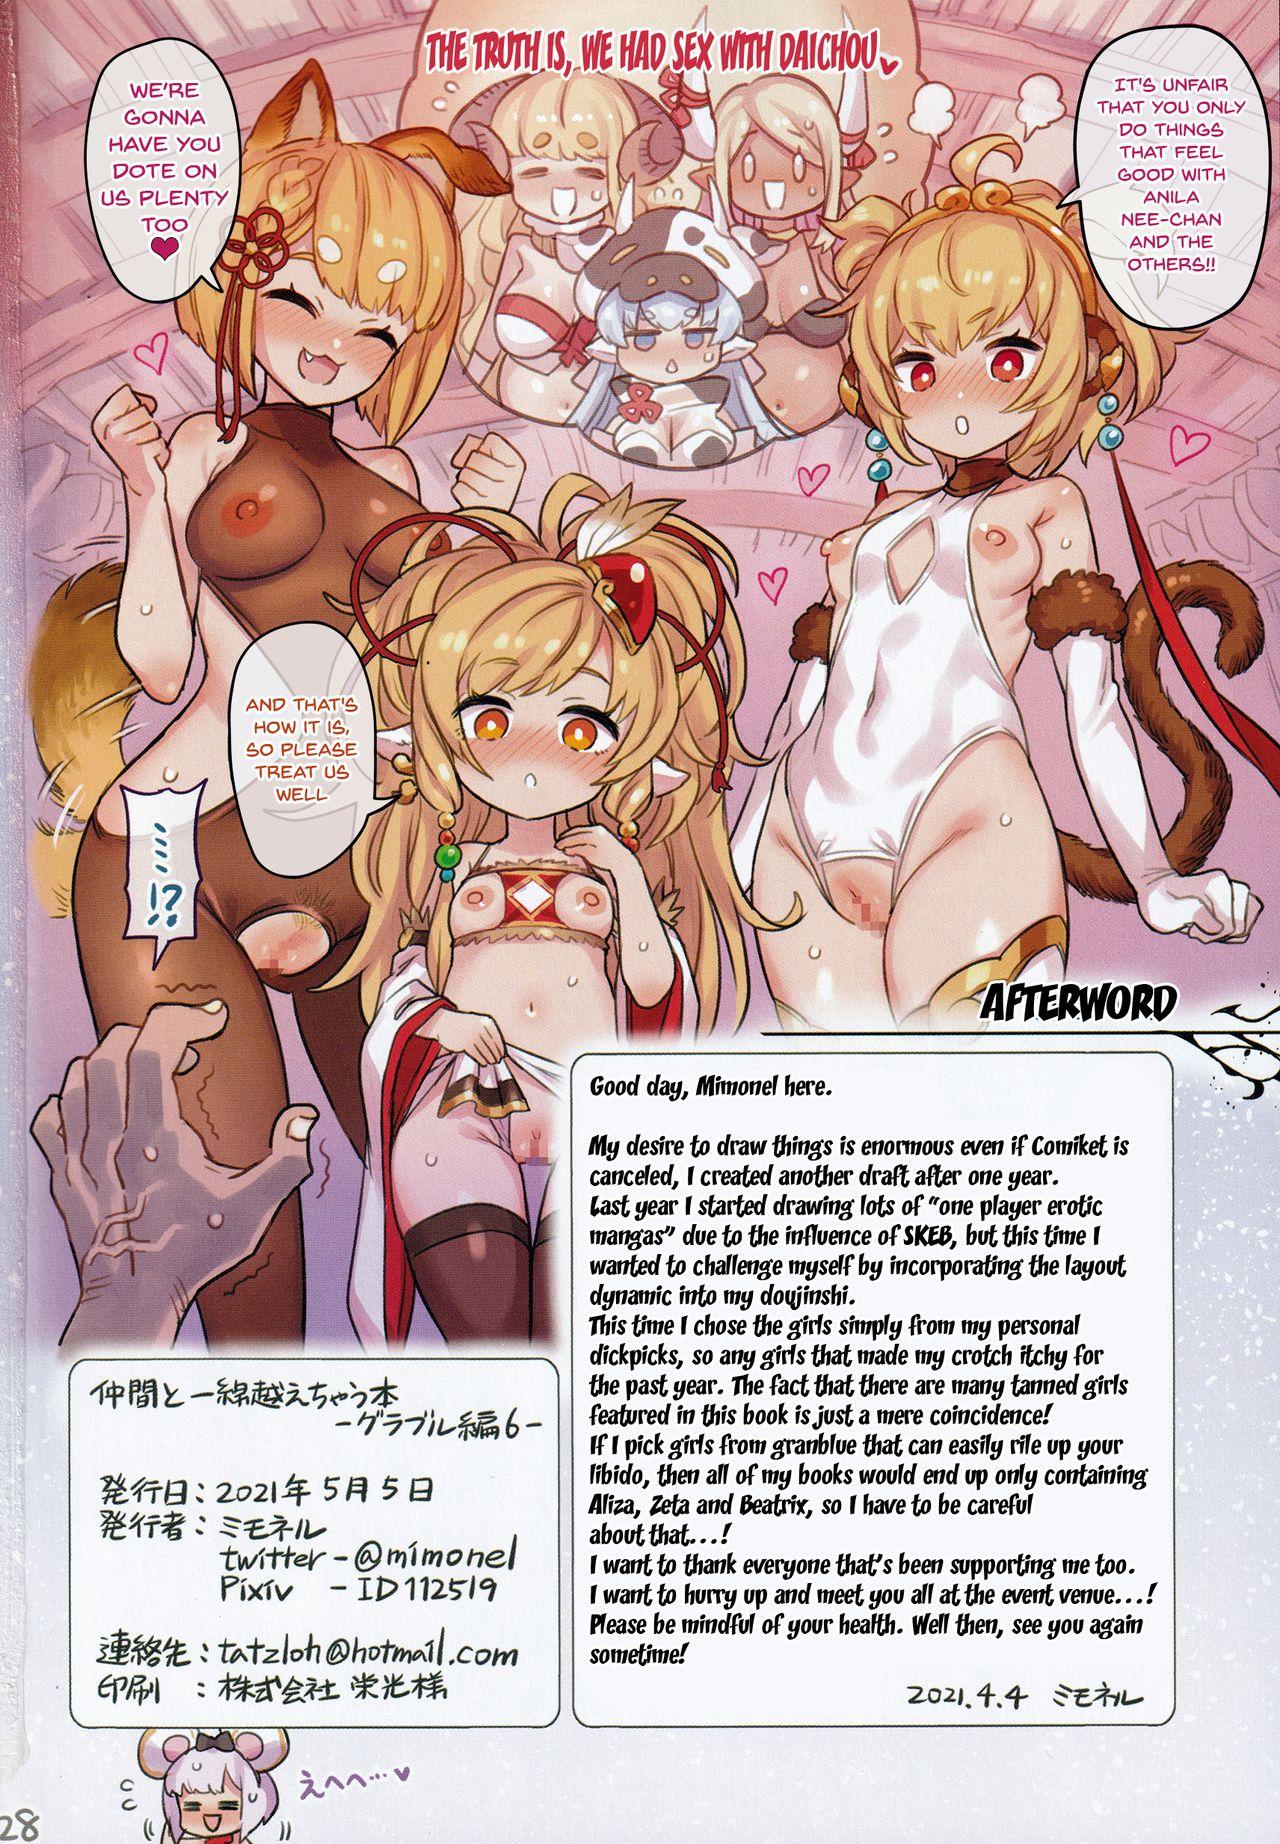 (AC3) [Mimoneland (Mimonel)] Nakama to Issen Koechau Hon -Grablu Hen 6- | A Book About Crossing The Line With Your Friends ~GranBlue Book 6~ (Granblue Fantasy) [English] {Doujins.com} 25